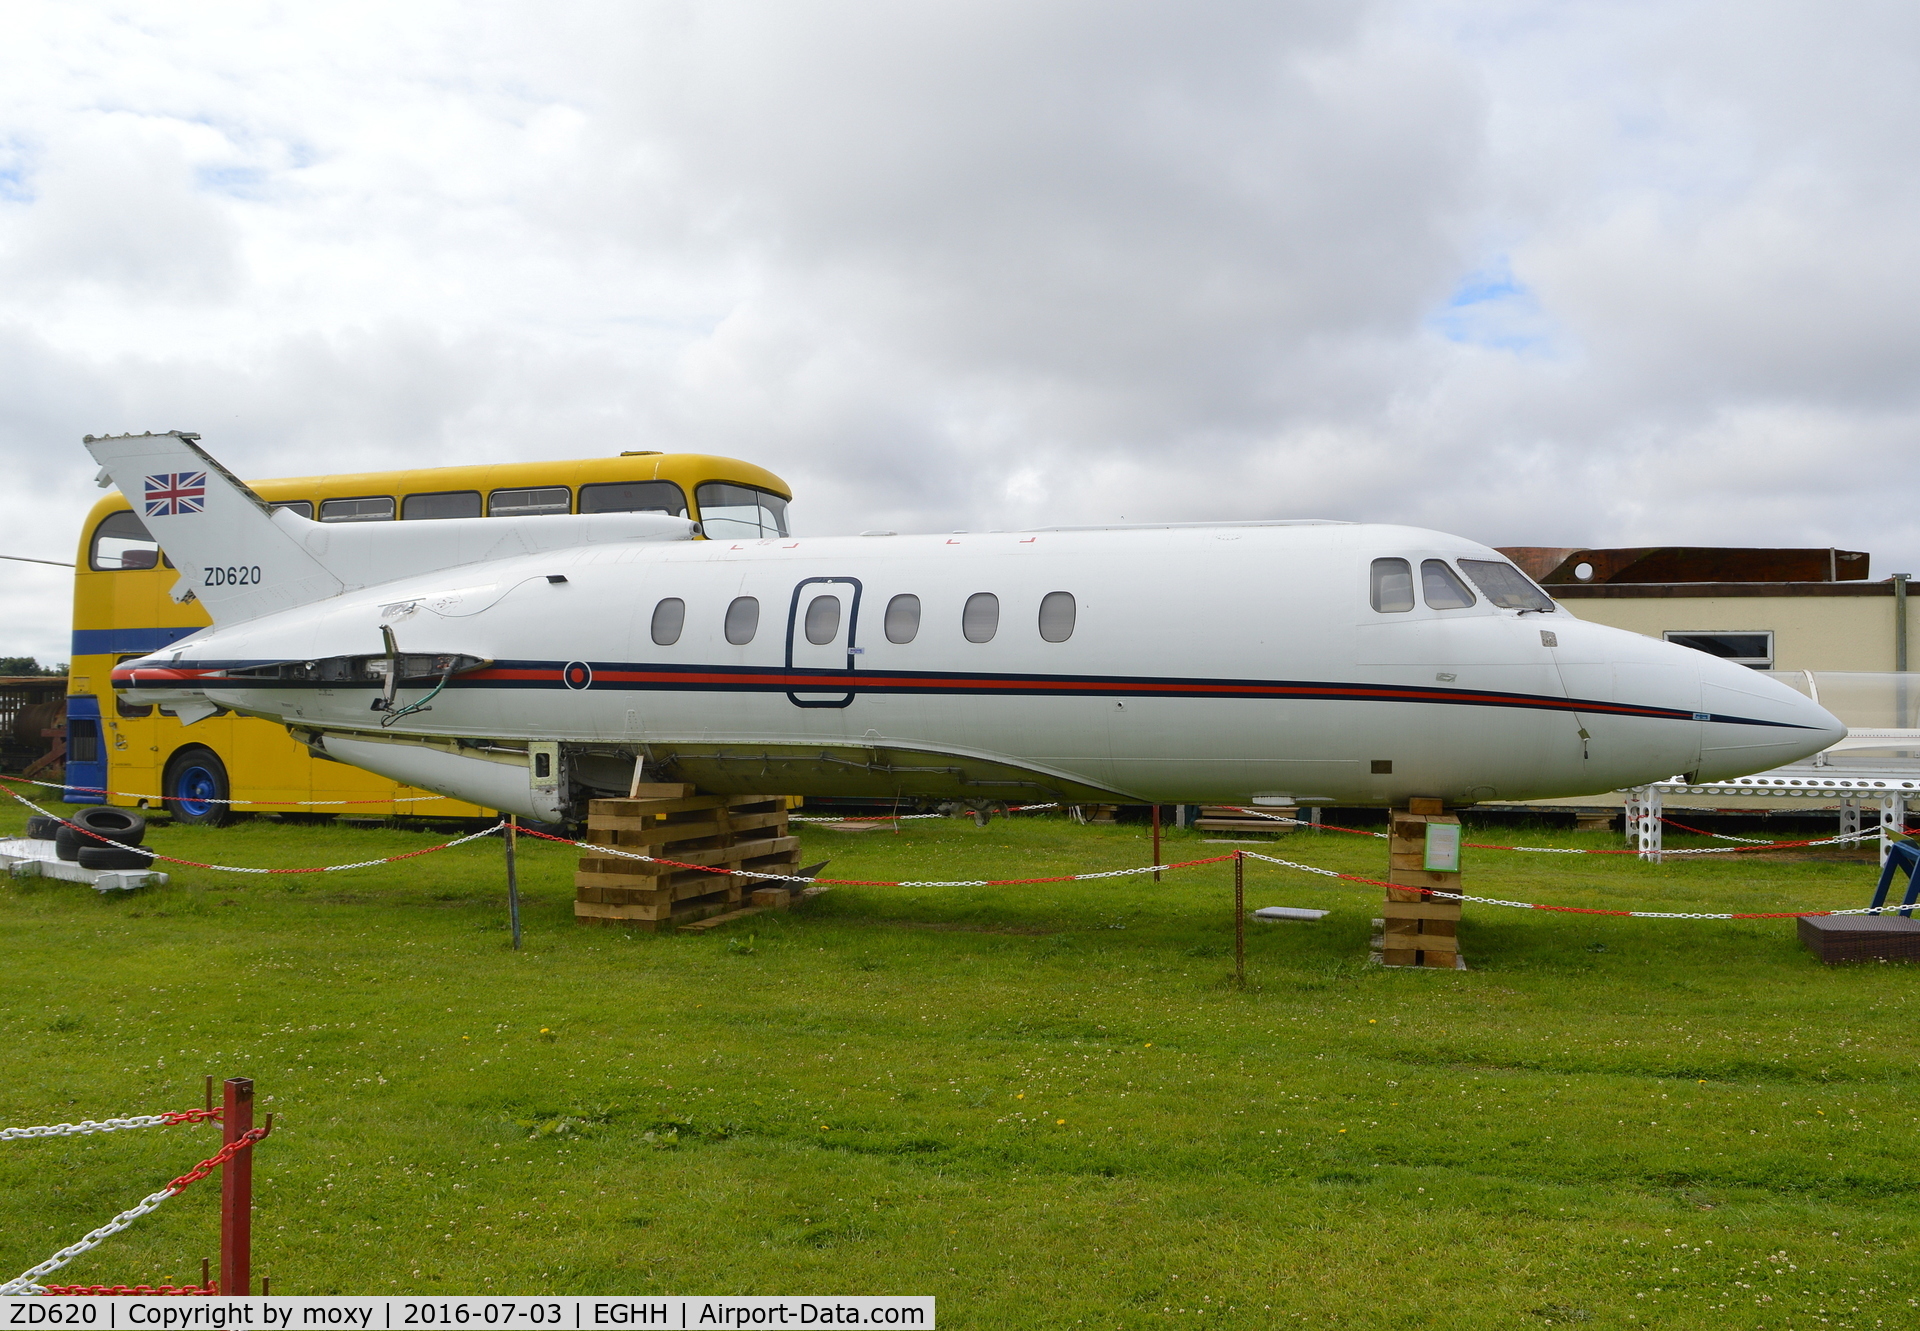 ZD620, British Aerospace BAe-125 CC.3 C/N 257181, Fuselage of BAe 125 Srs 700 at the Bournemouth Aviation Museum.